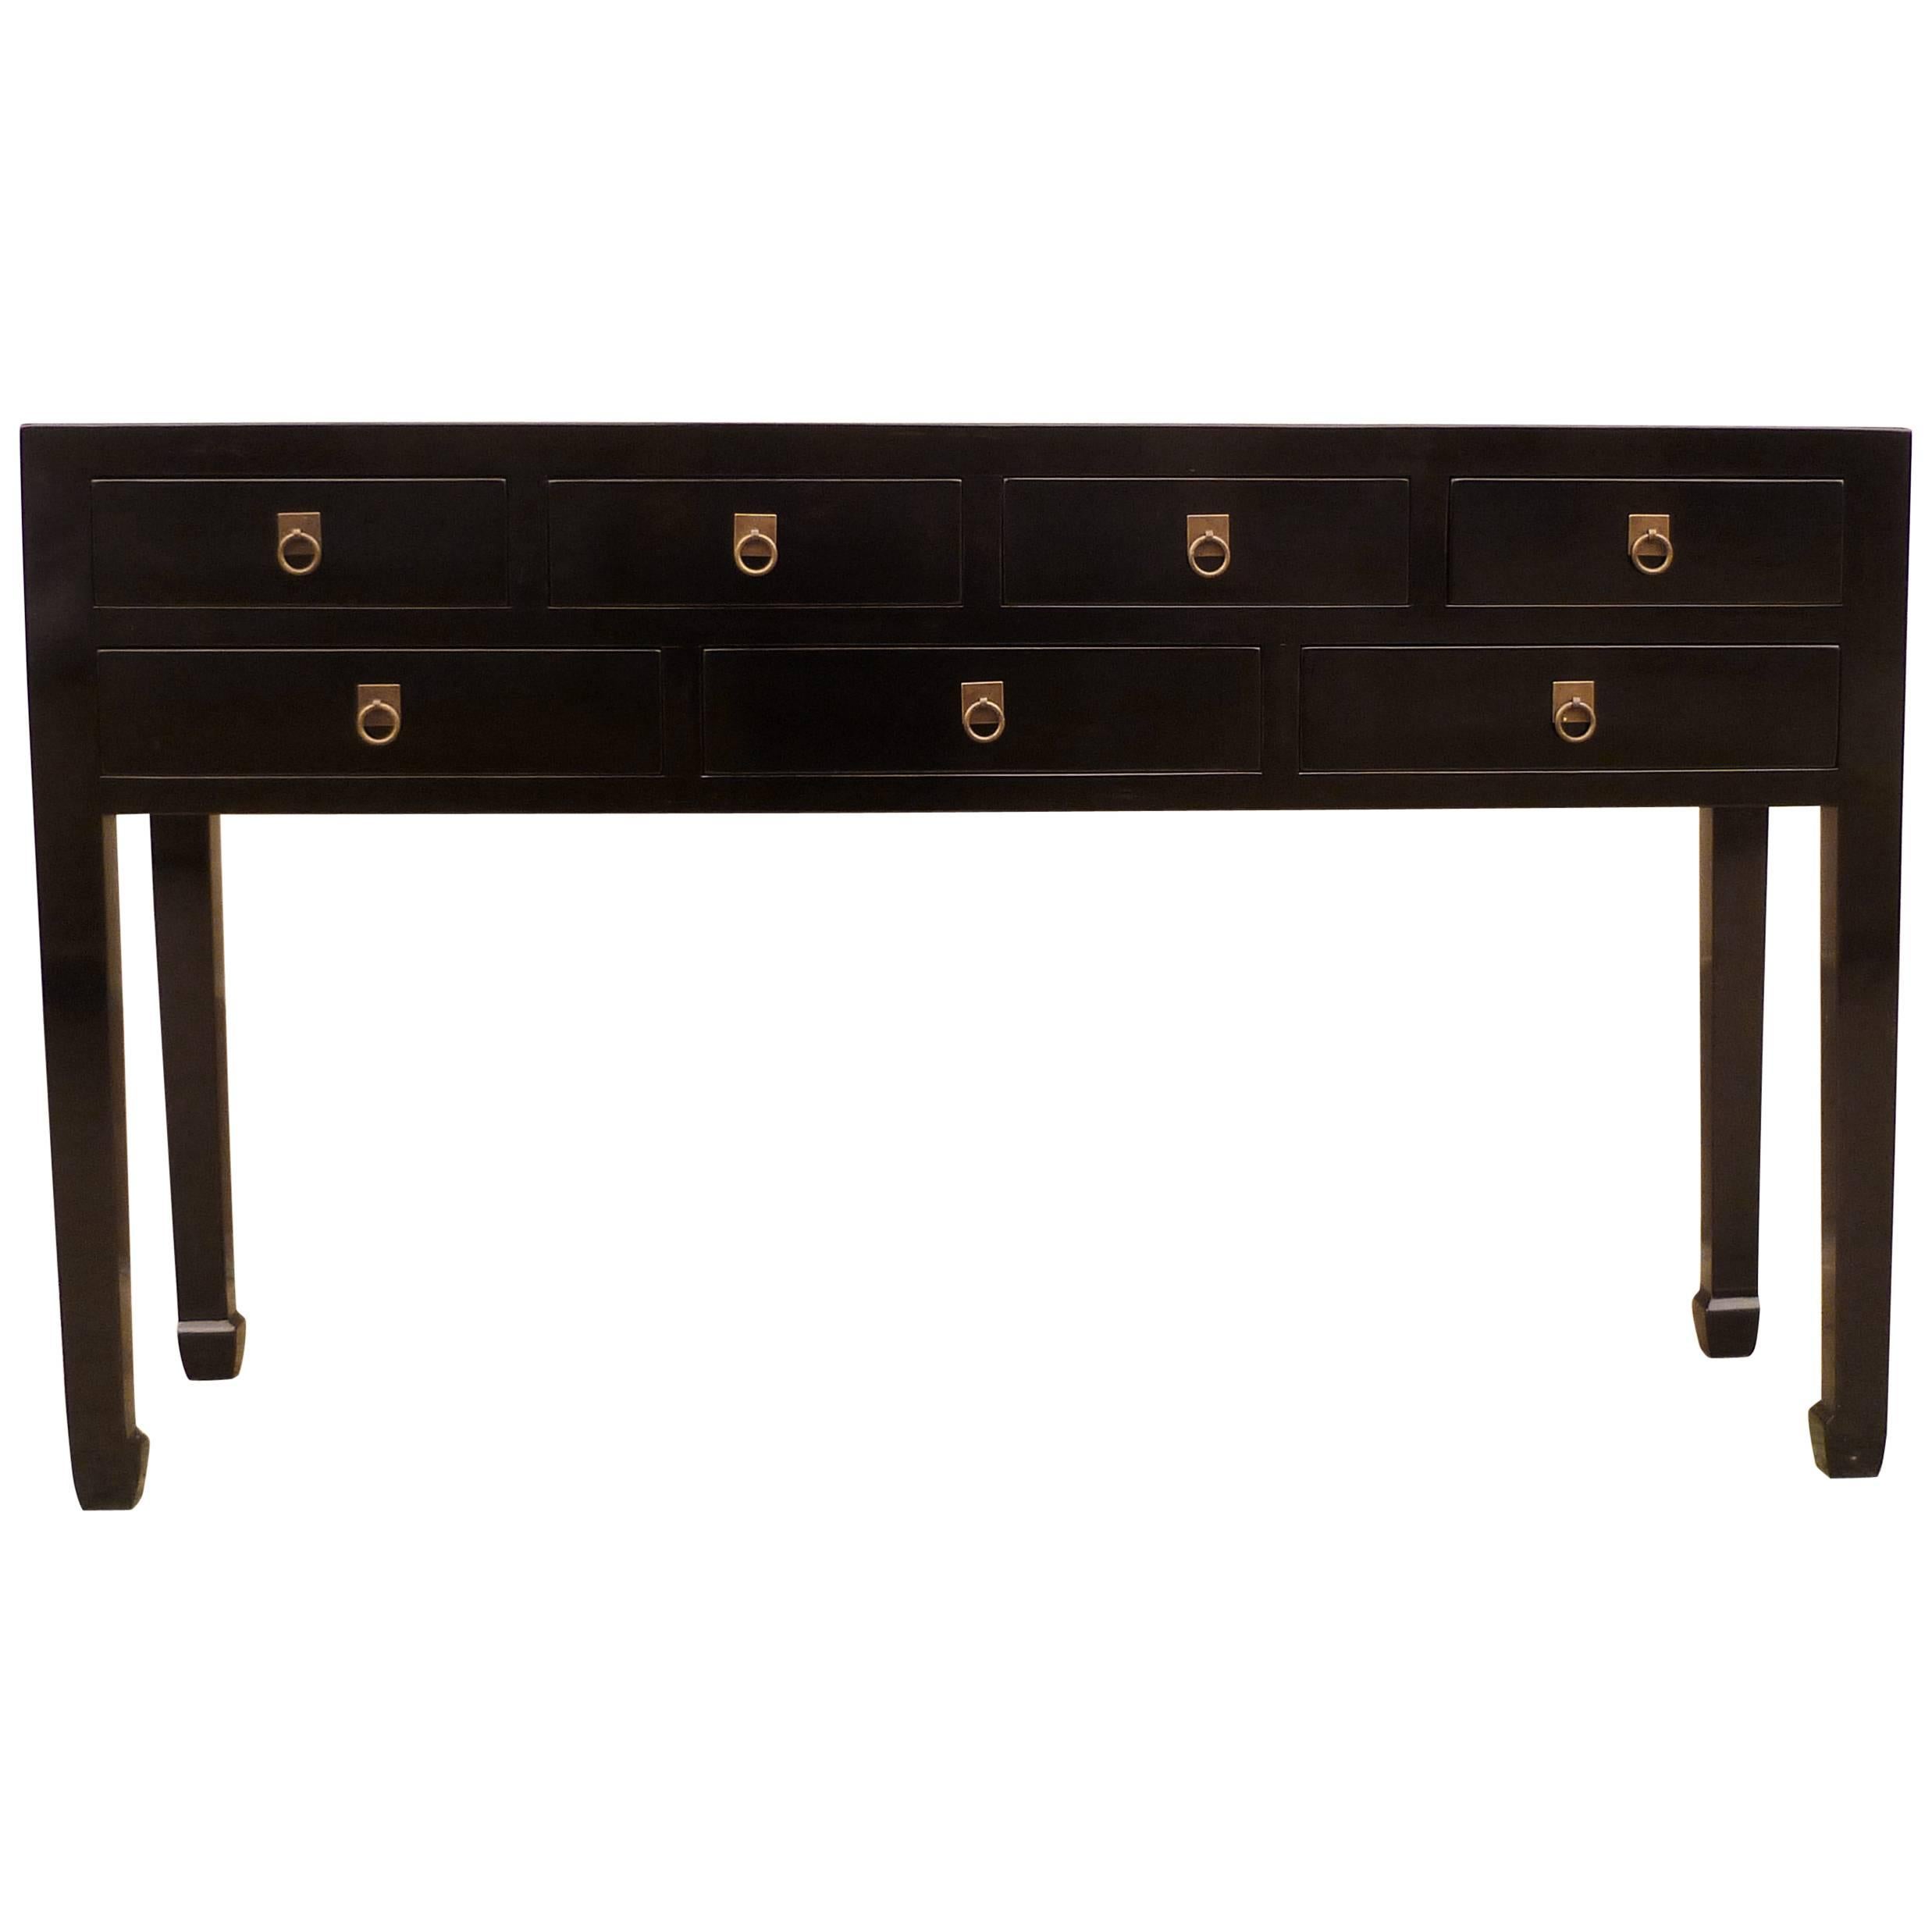 Refined Black Lacquer Console Table with Drawers